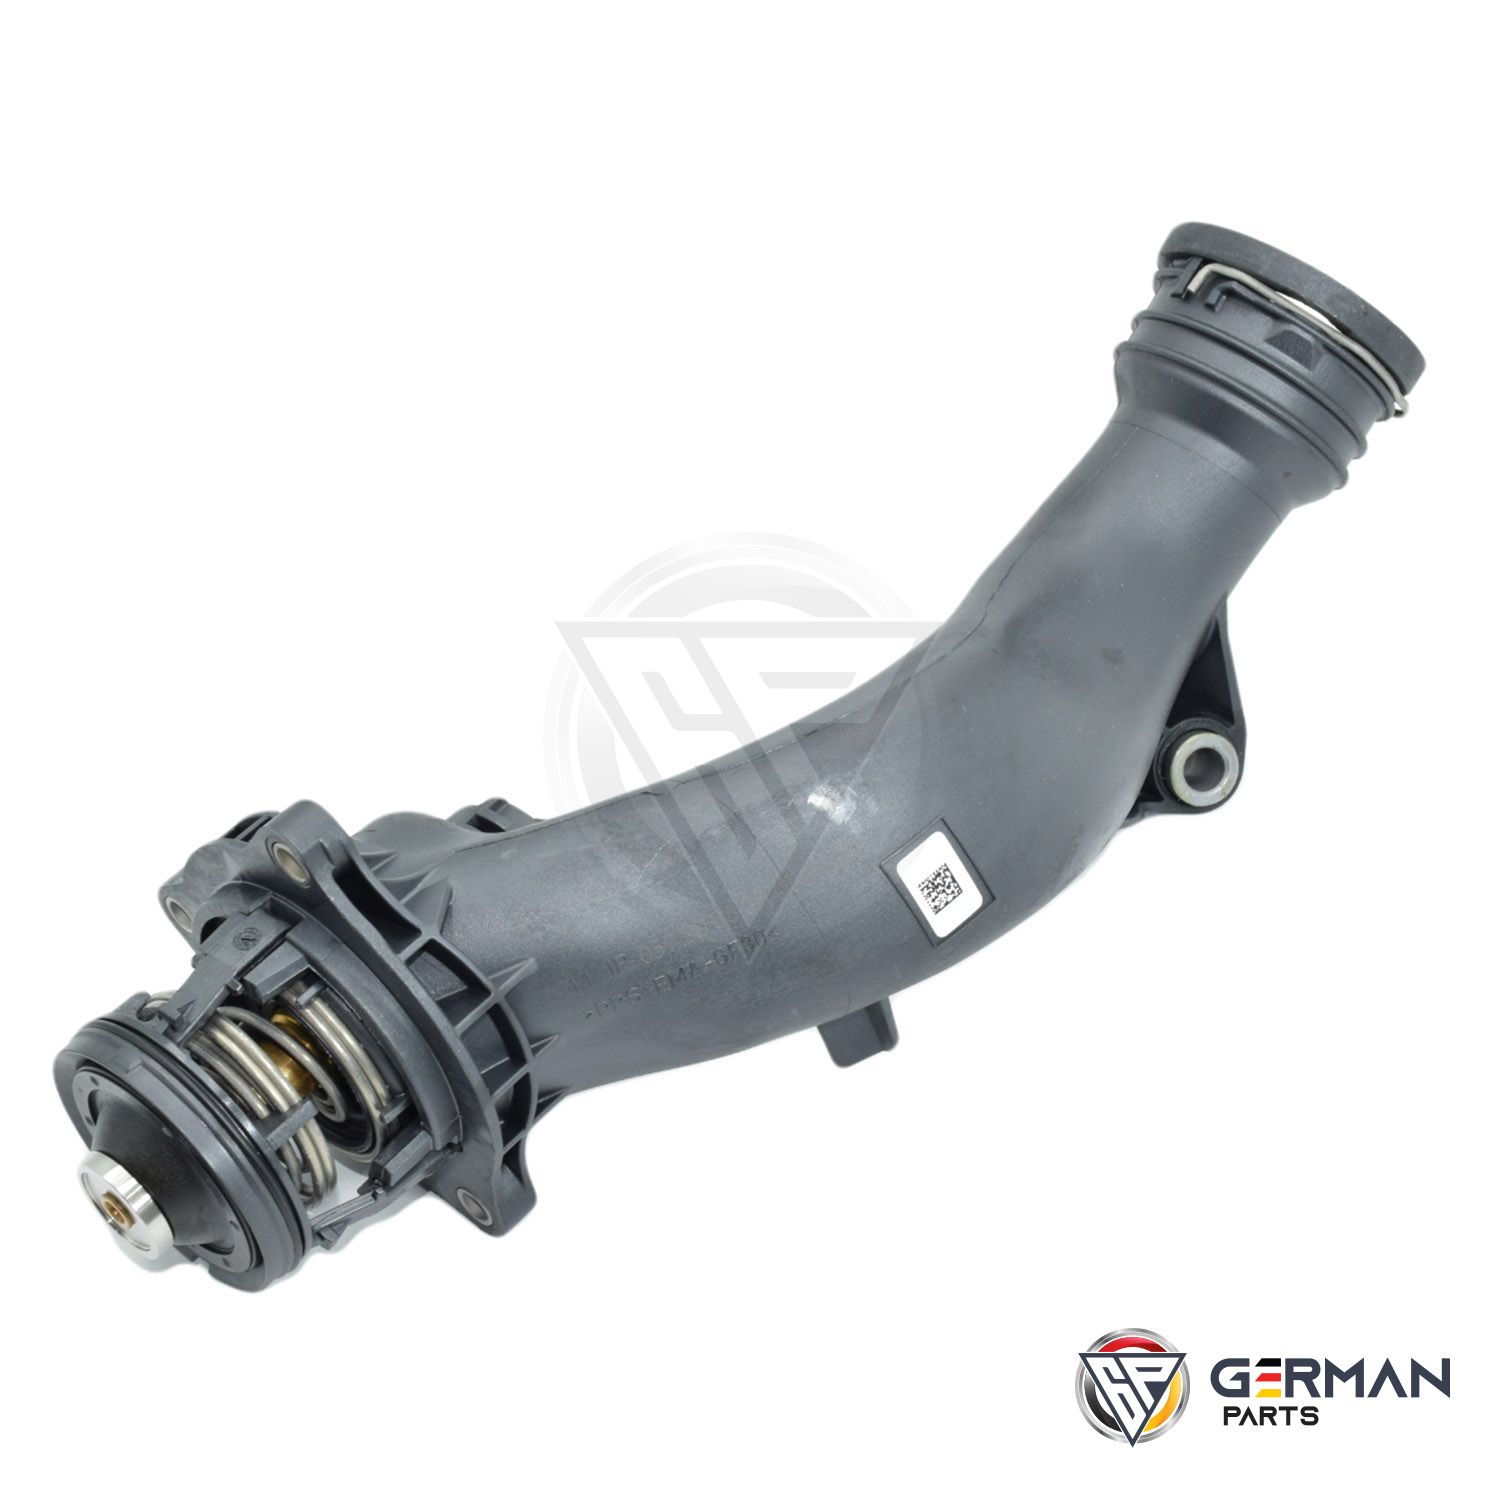 Buy Mercedes Benz Thermostat Assembly 2782000615 - German Parts